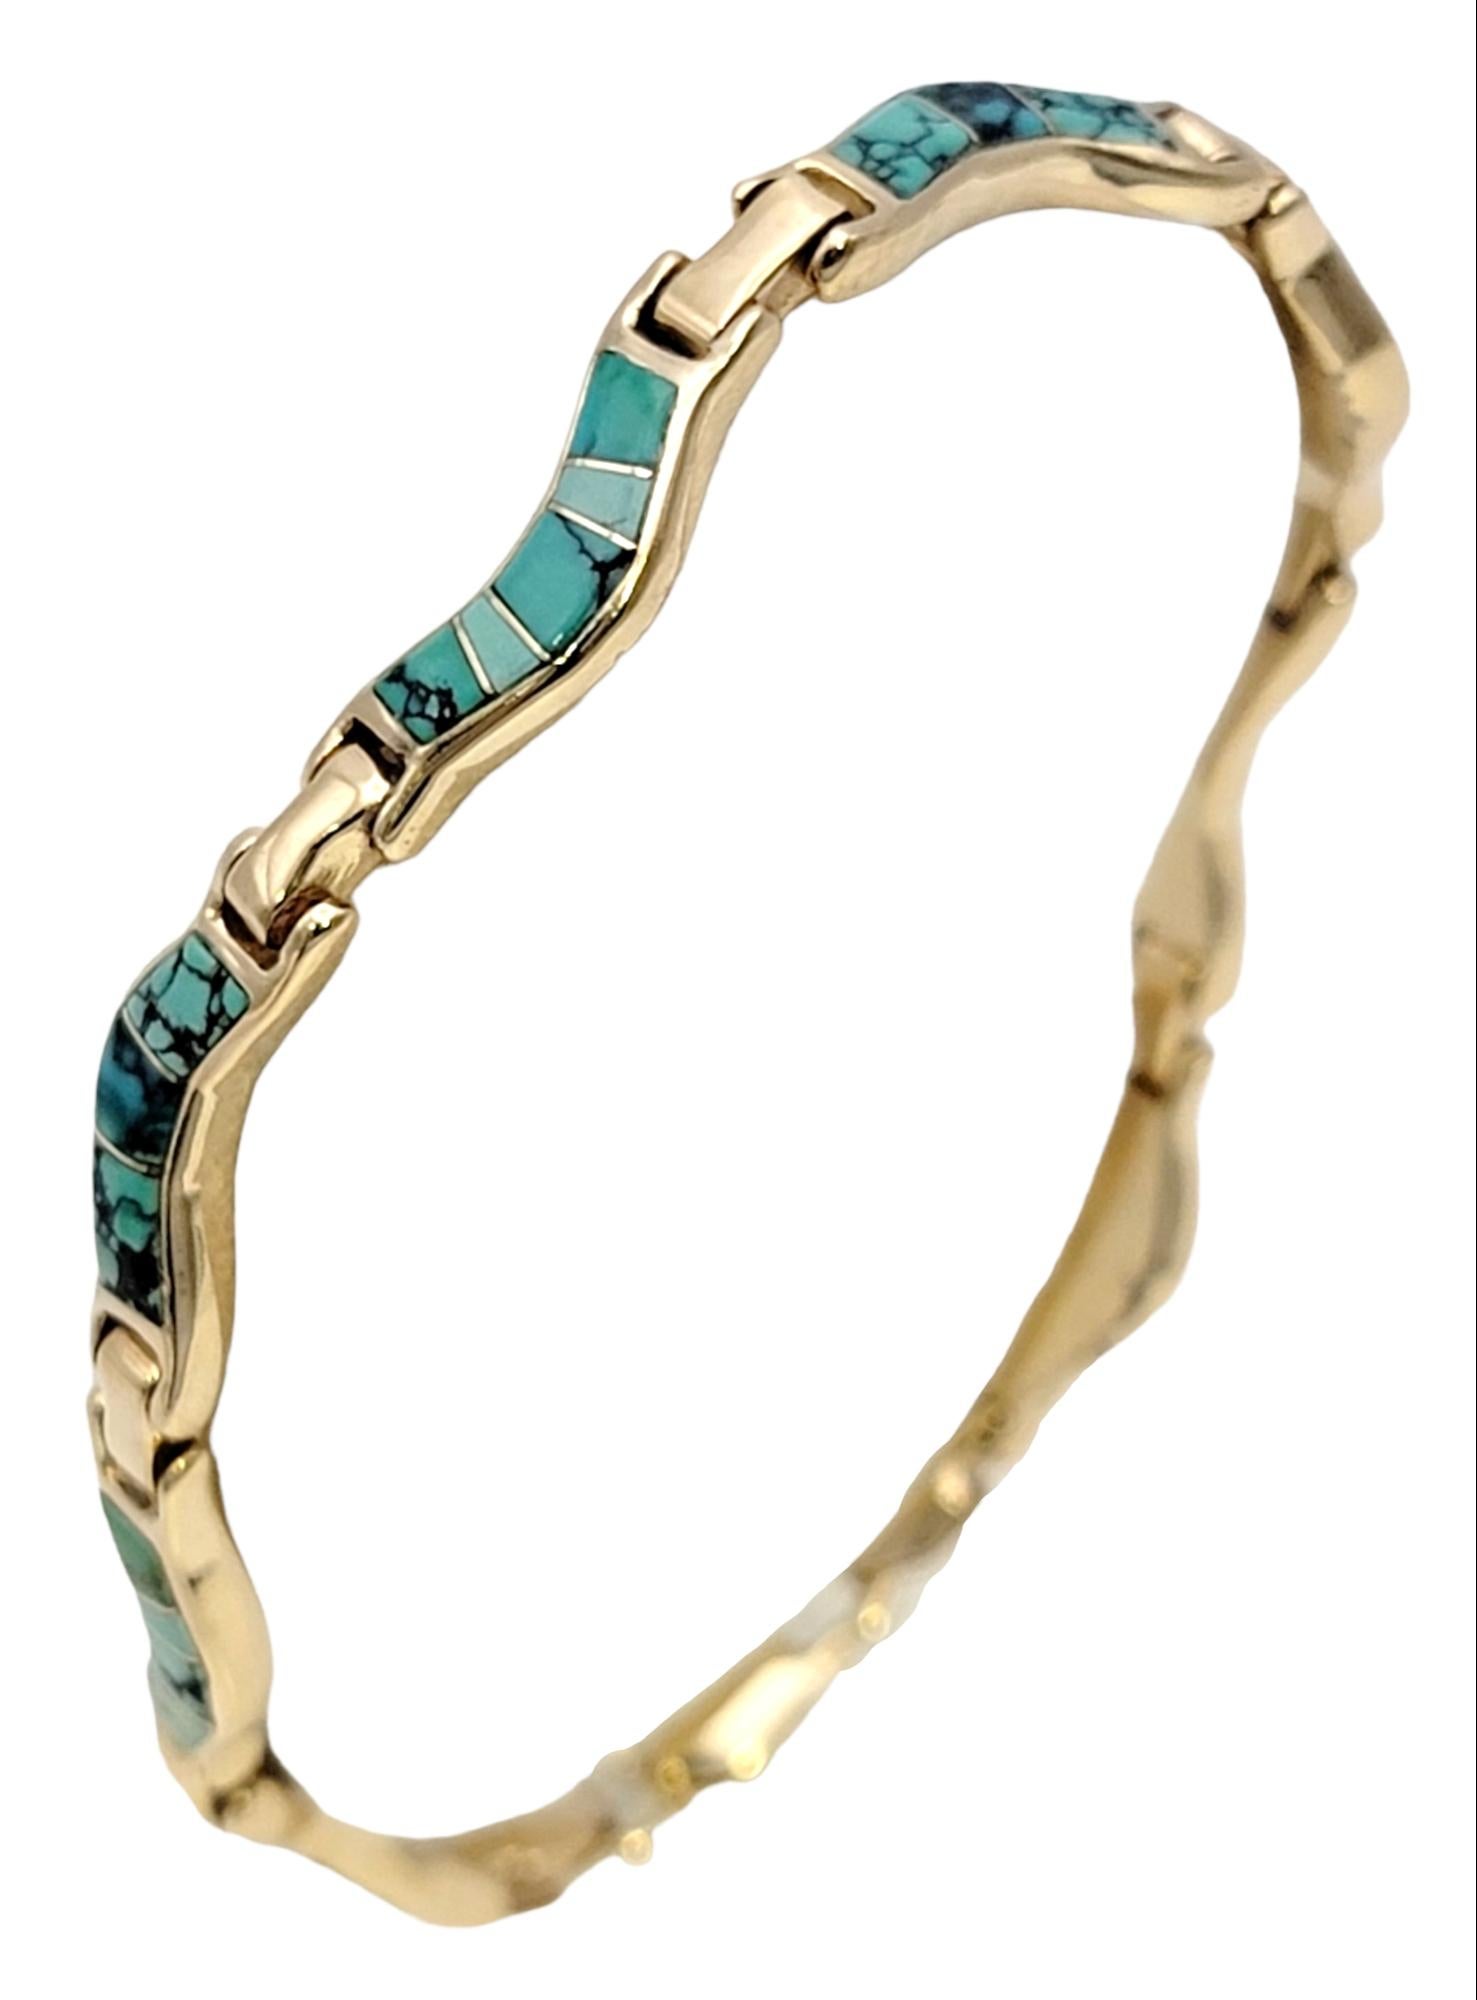 Native American Natural Turquoise Inlay Wavy Link Bracelet in Polished 14 Karat Yellow Gold For Sale